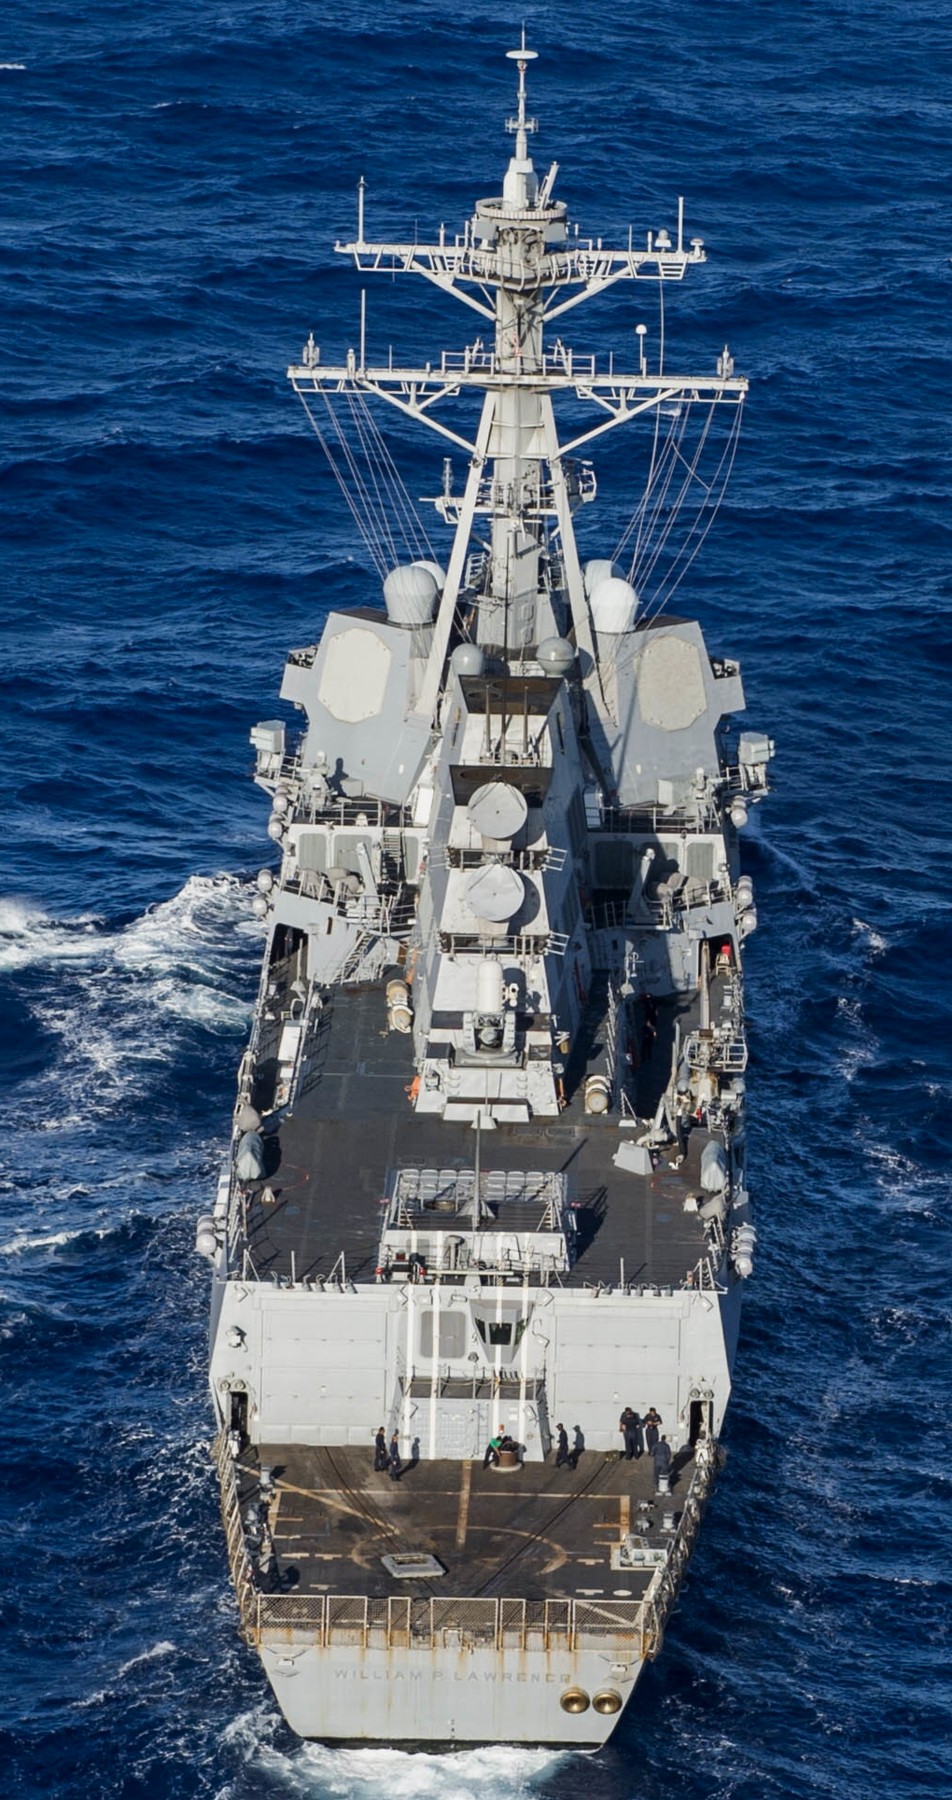 ddg-110 uss william p. lawrence arleigh burke class guided missile destroyer aegis us navy 31